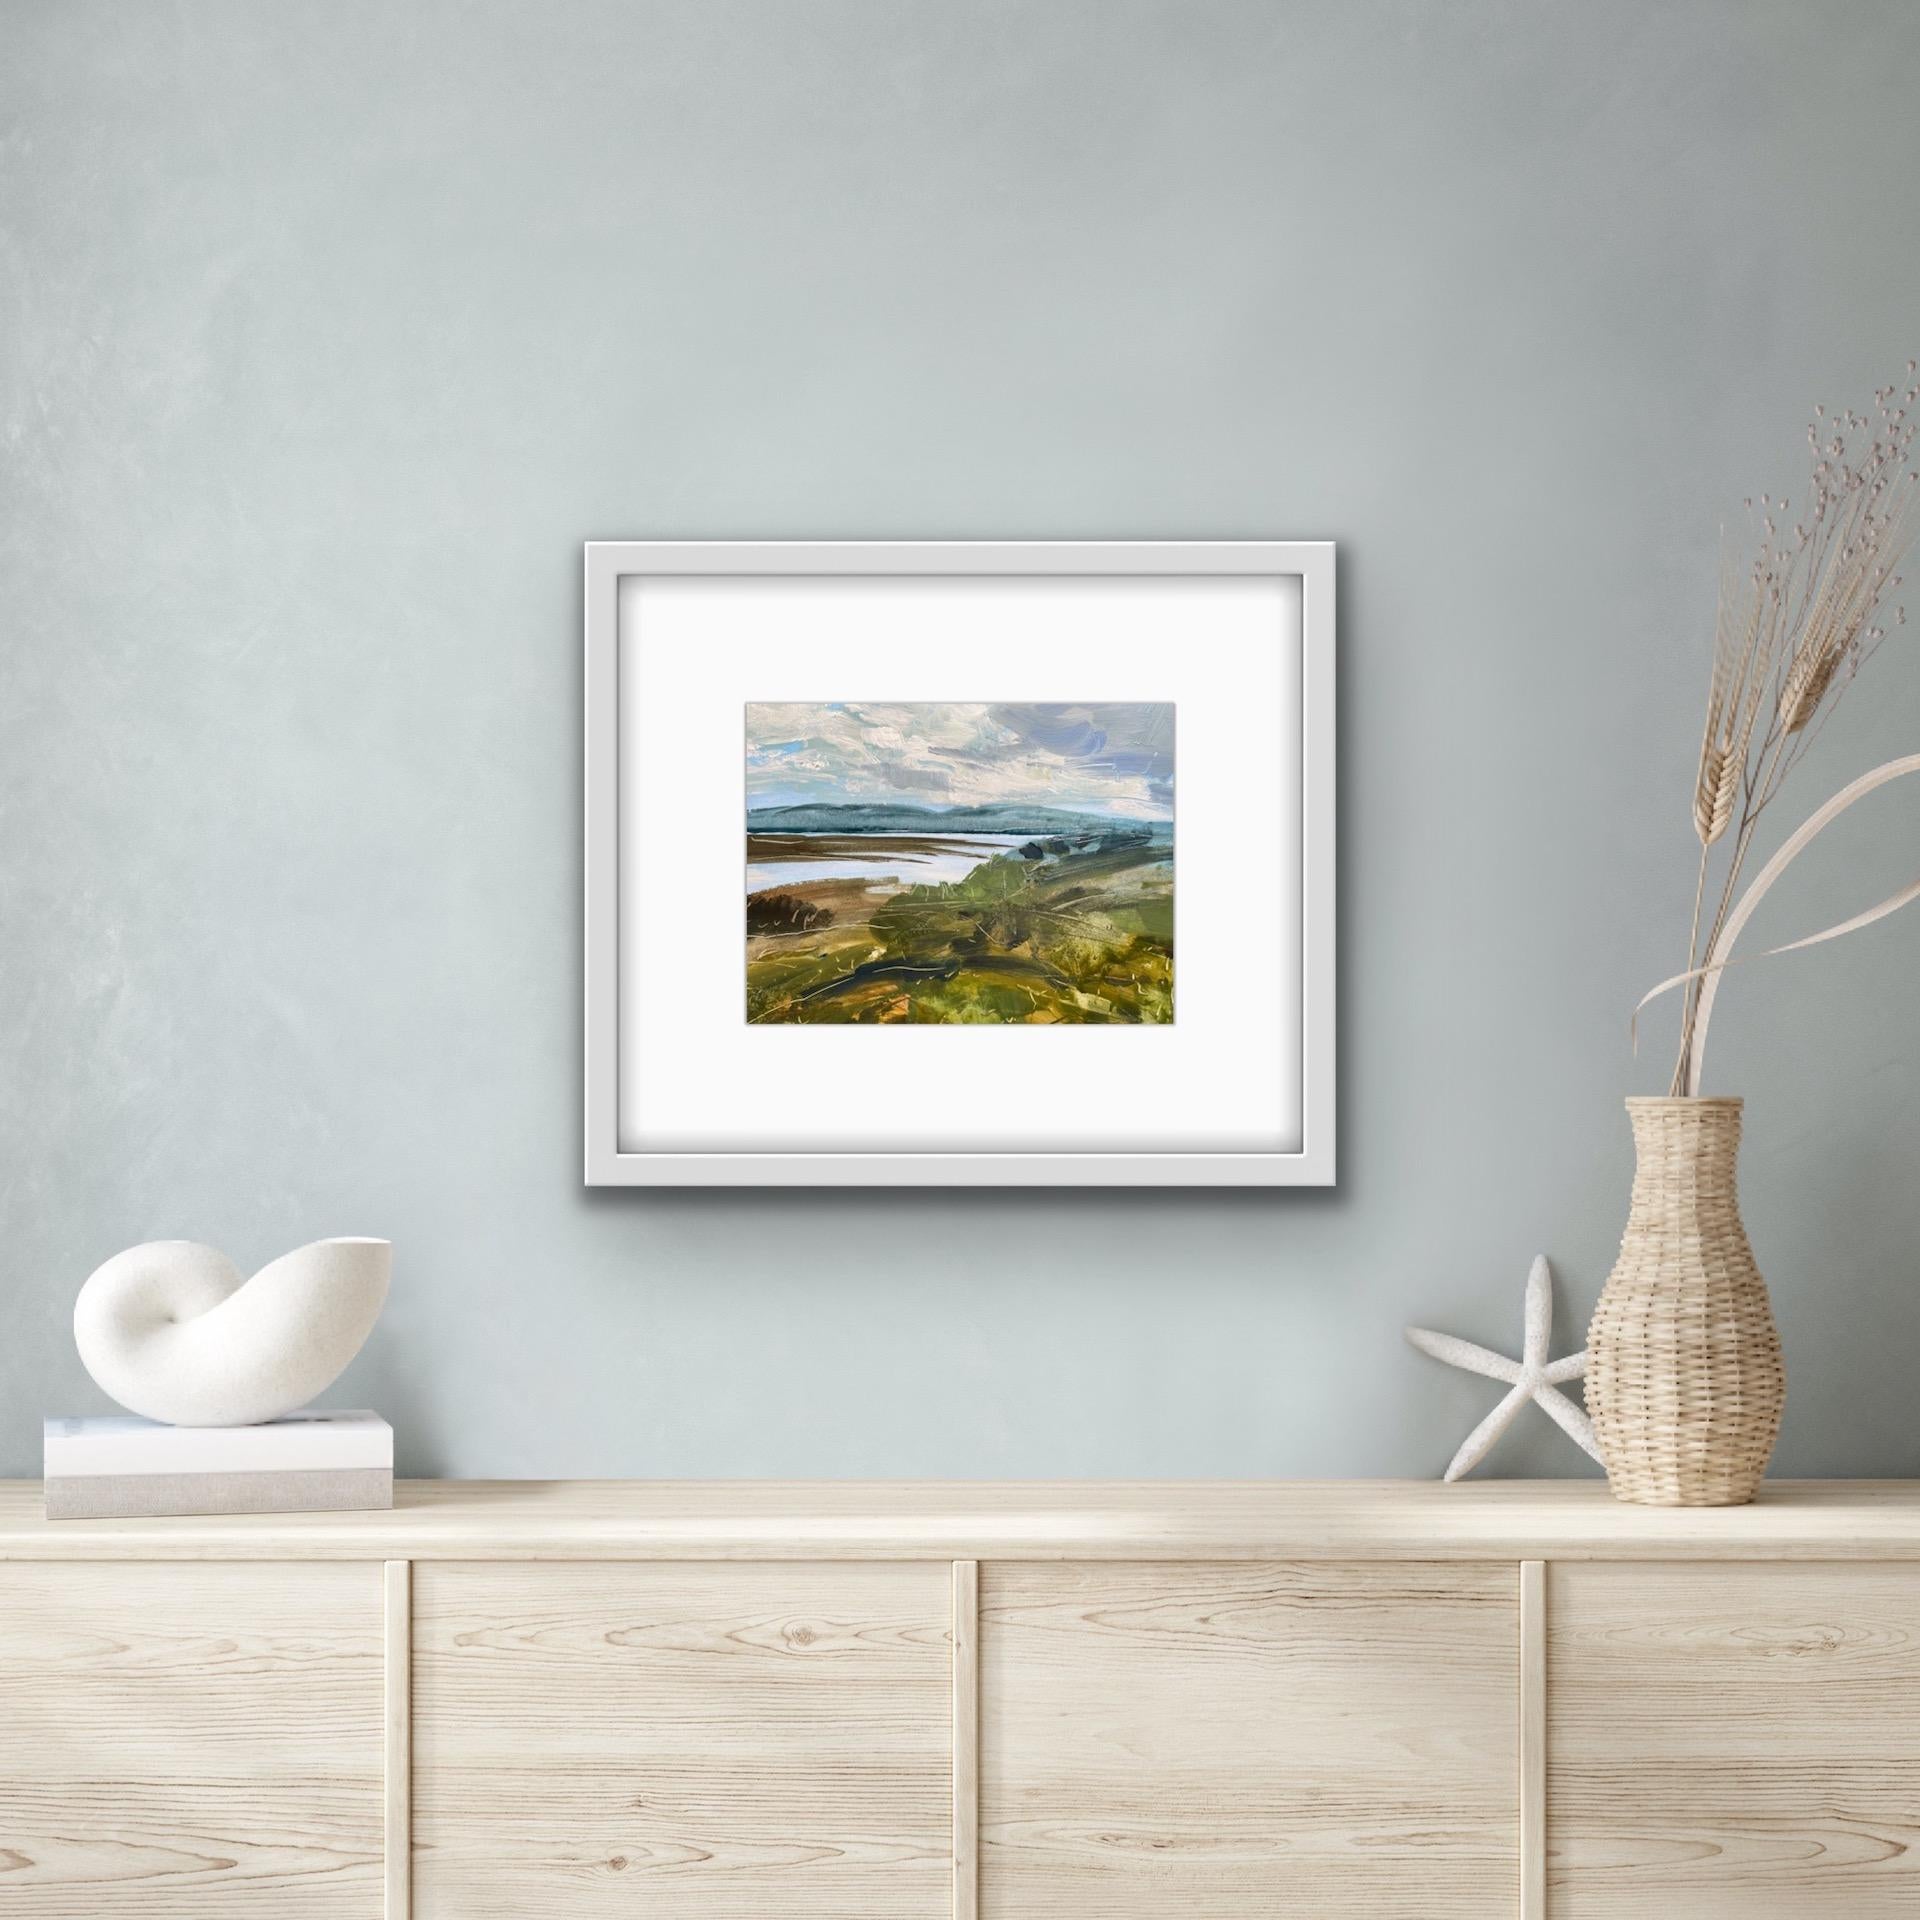 View of Loch Craignish (mounted original painting) [2021]
Original
Mixed media
Image size: H:20 cm x W:25 cm
Complete Size of Unframed Work: H:28 cm x W:36 cm x D:1cm
Sold Unframed
Please note that insitu images are purely an indication of how a